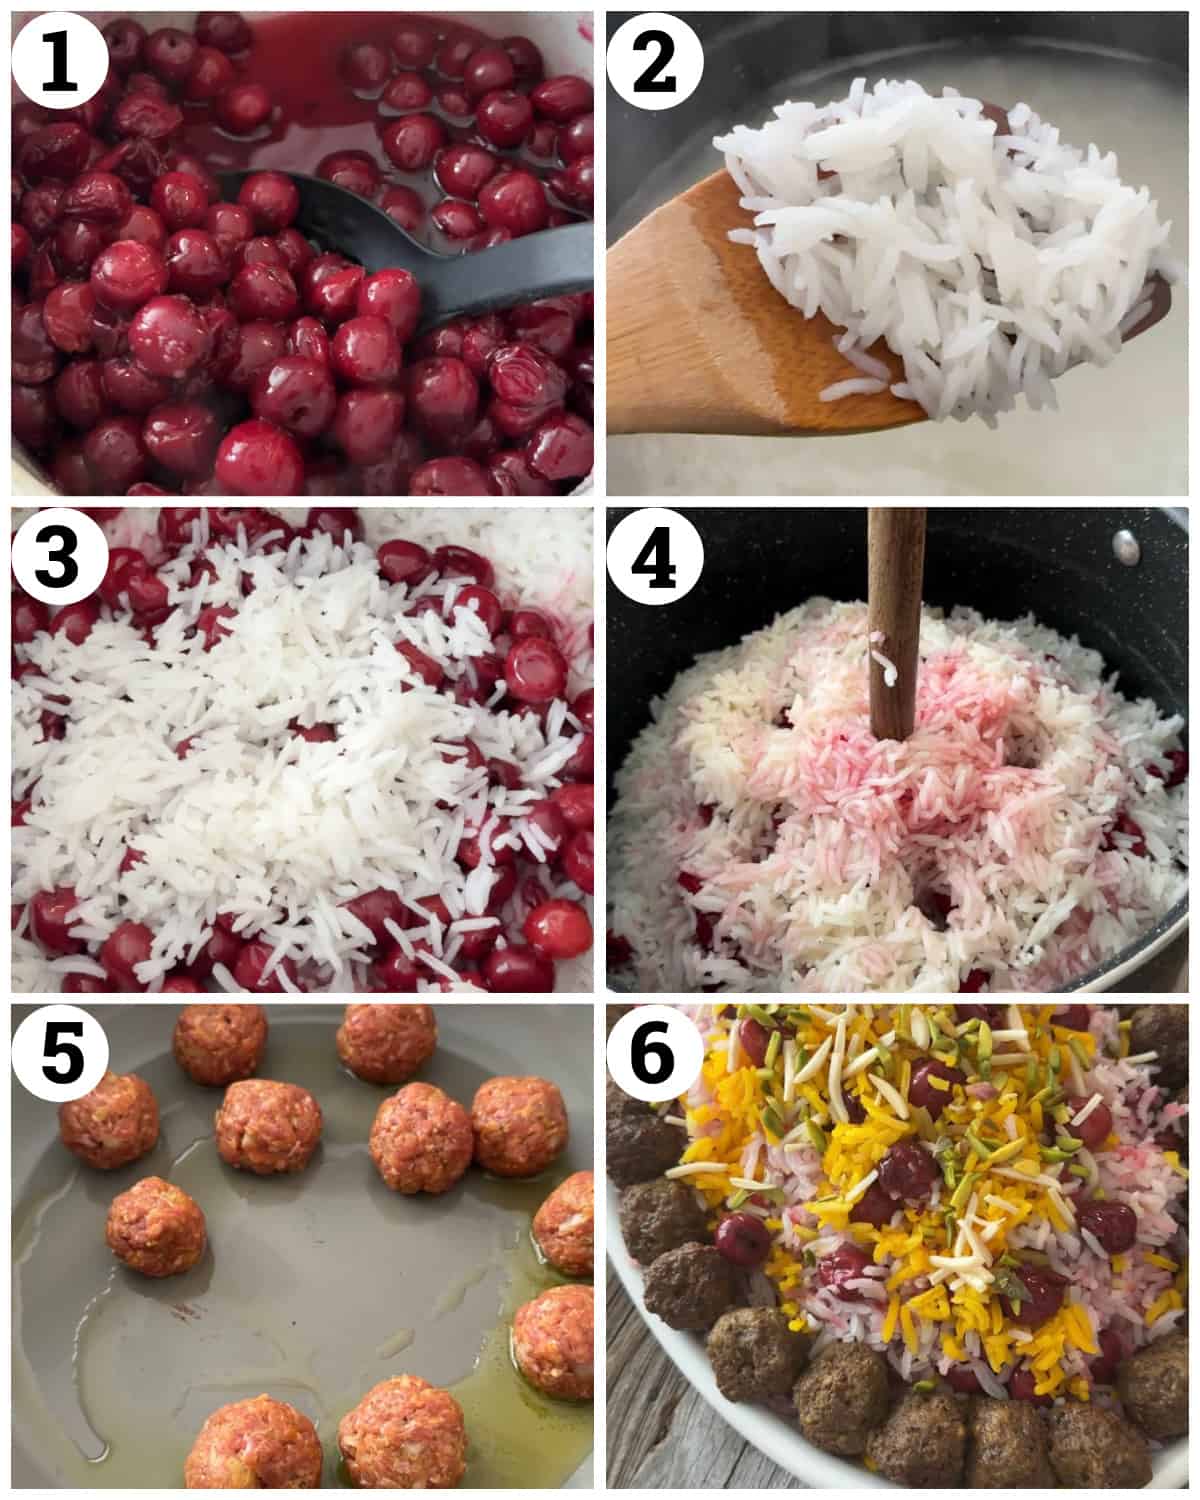 Cook the sour cherries, prepare the rice, layer and cook. Serve with meatballs. 